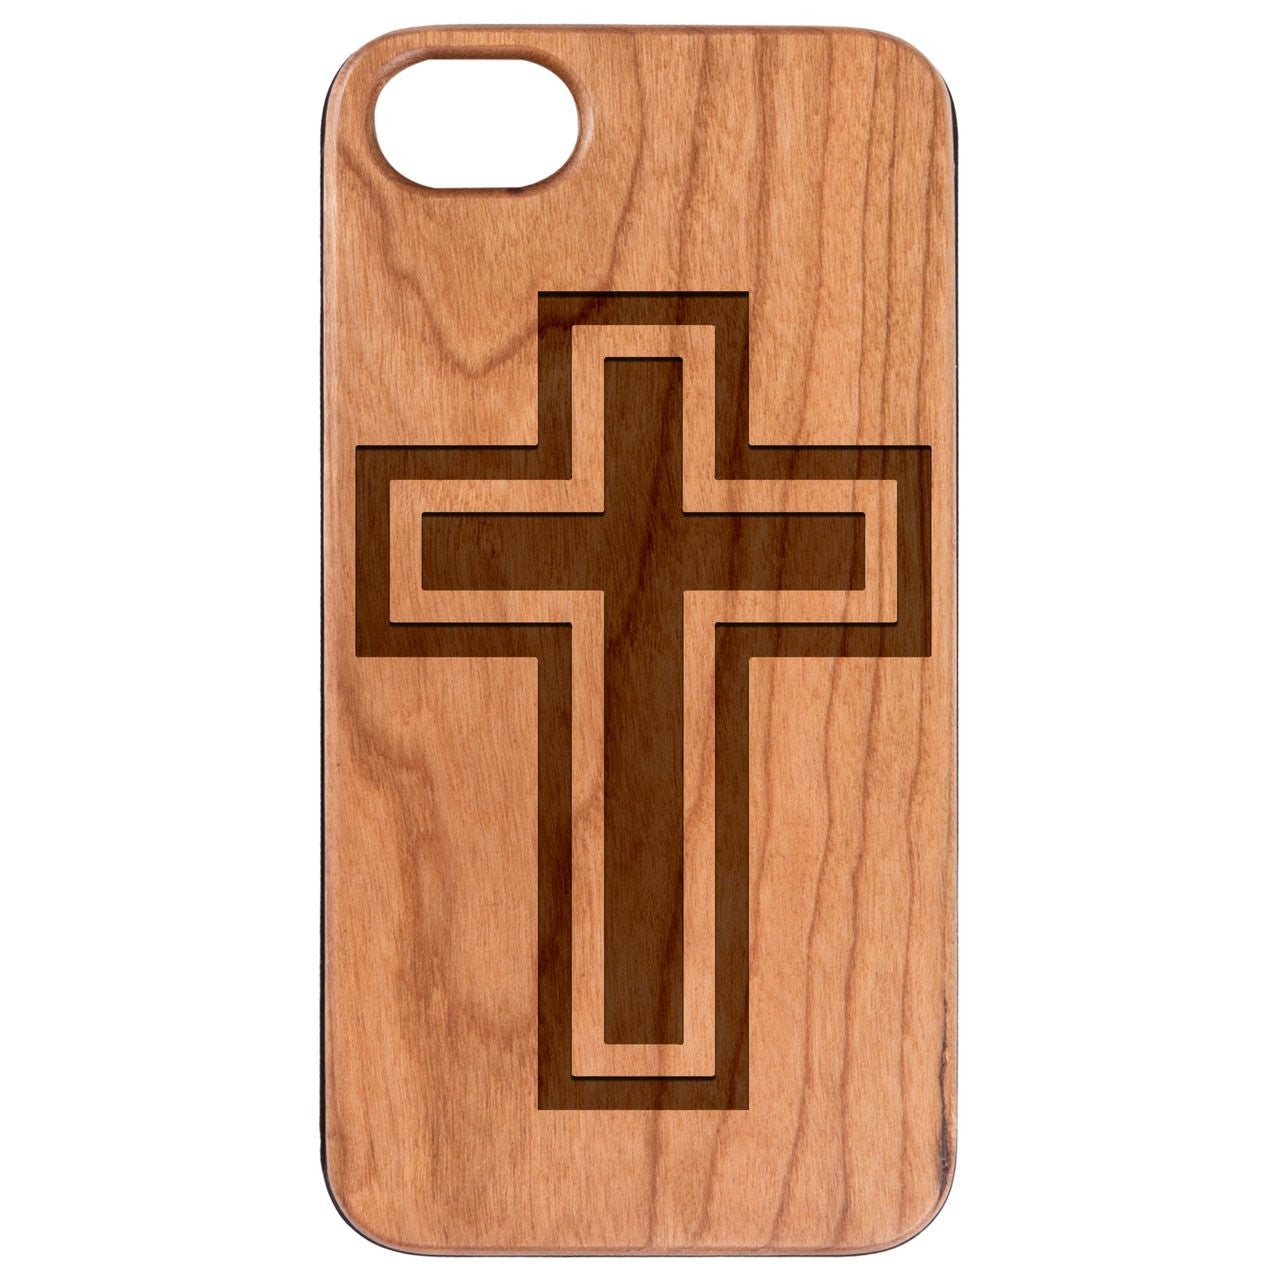  Cross 1 - Engraved - Wooden Phone Case - IPhone 13 Models